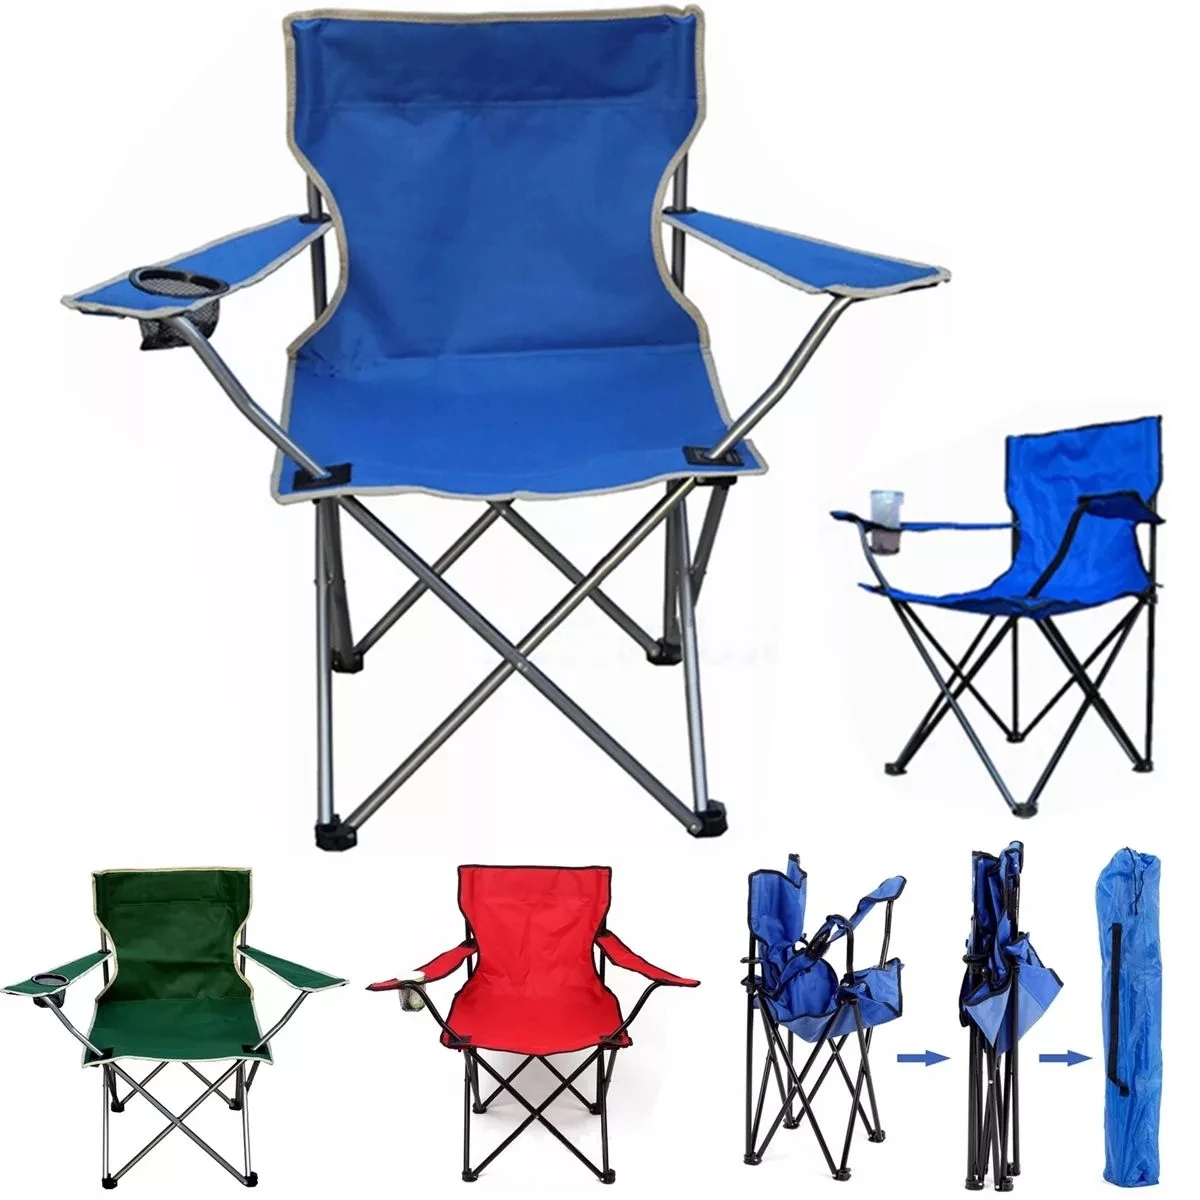 YuKing Camping Chair Portable Fishing Stool High Back Folding Camp Chair for Travel Beach Picnic Hiking Painting